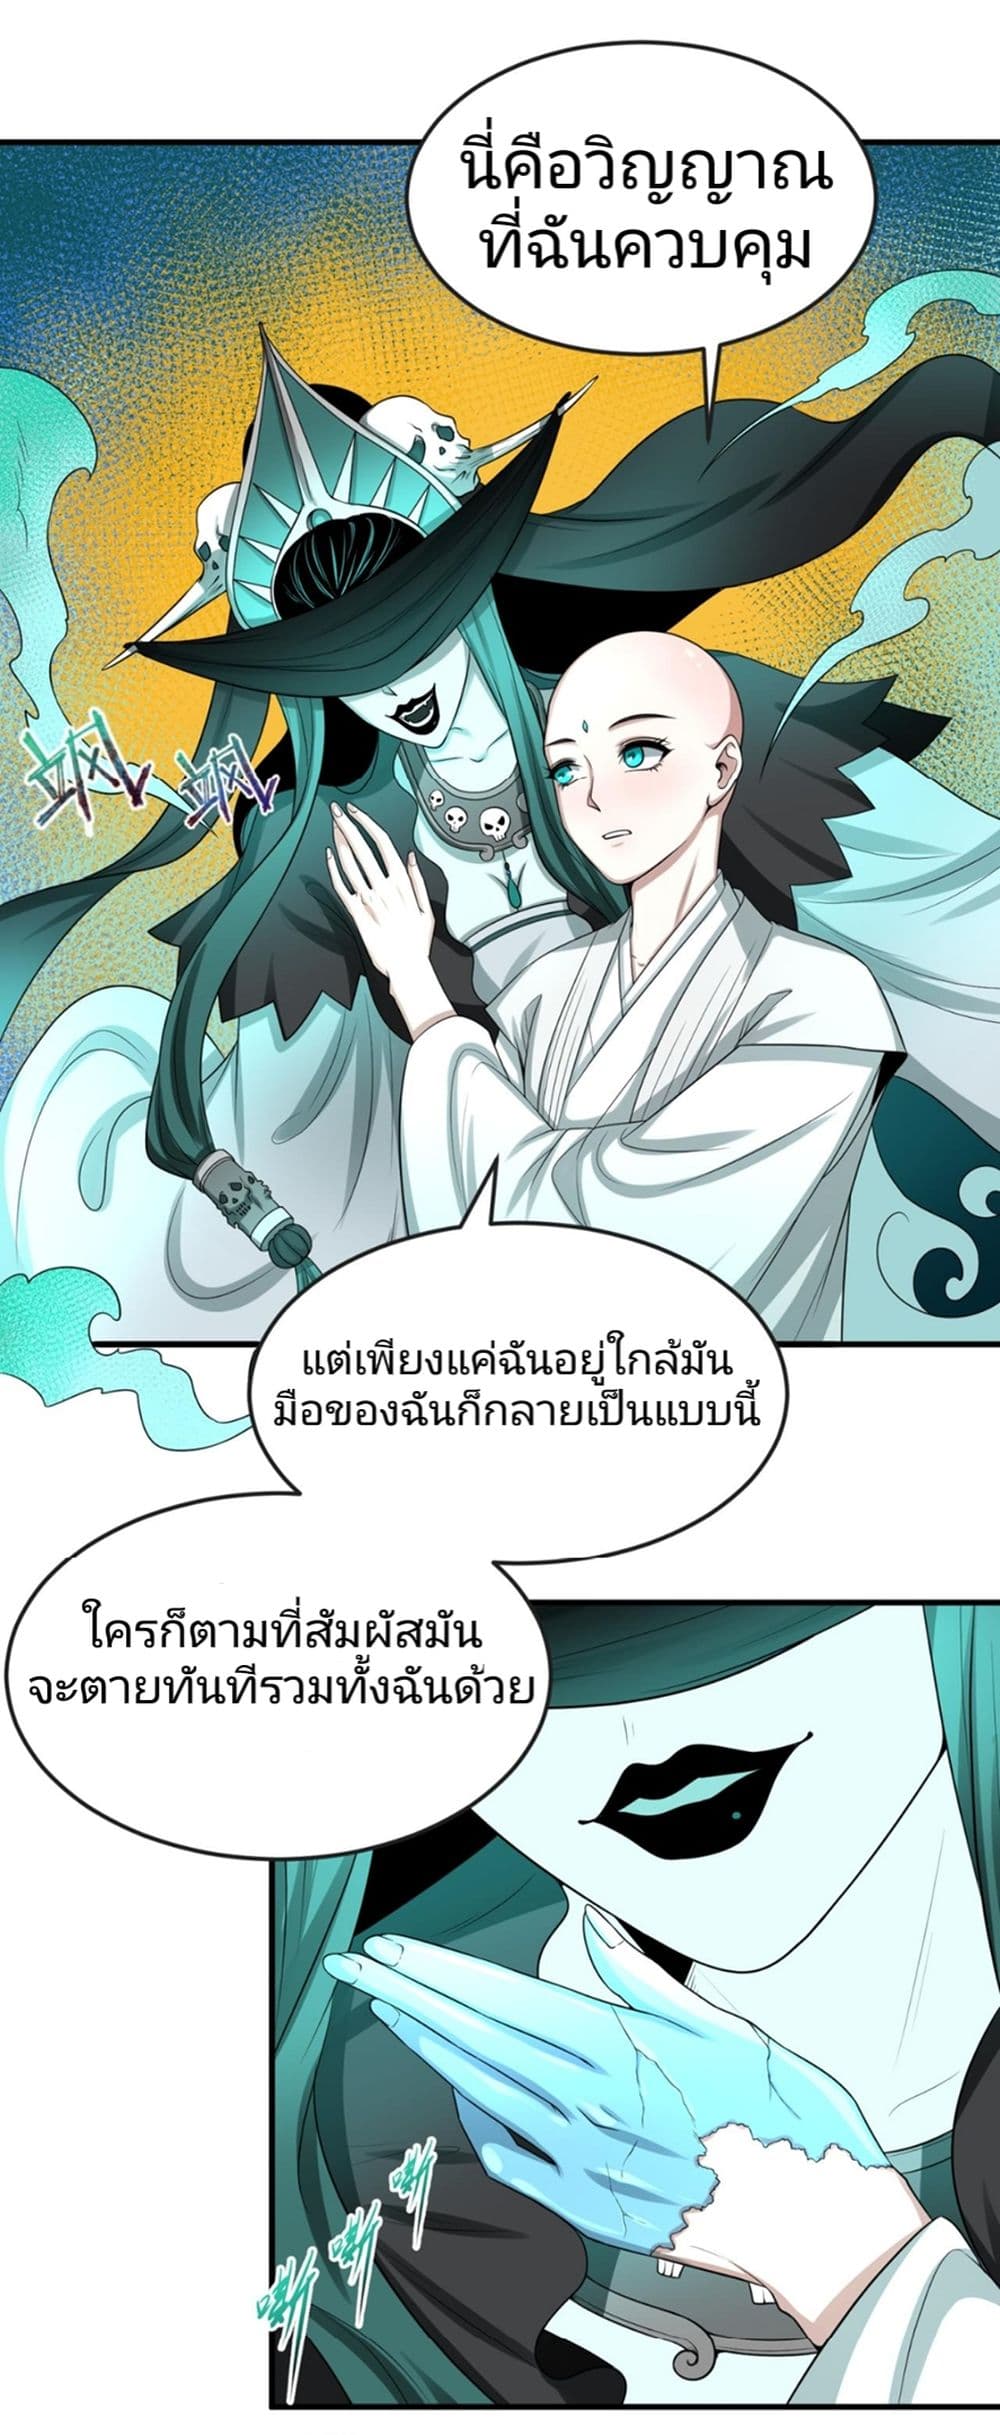 The Age of Ghost Spirits à¸à¸­à¸à¸à¸µà¹ 46 (8)